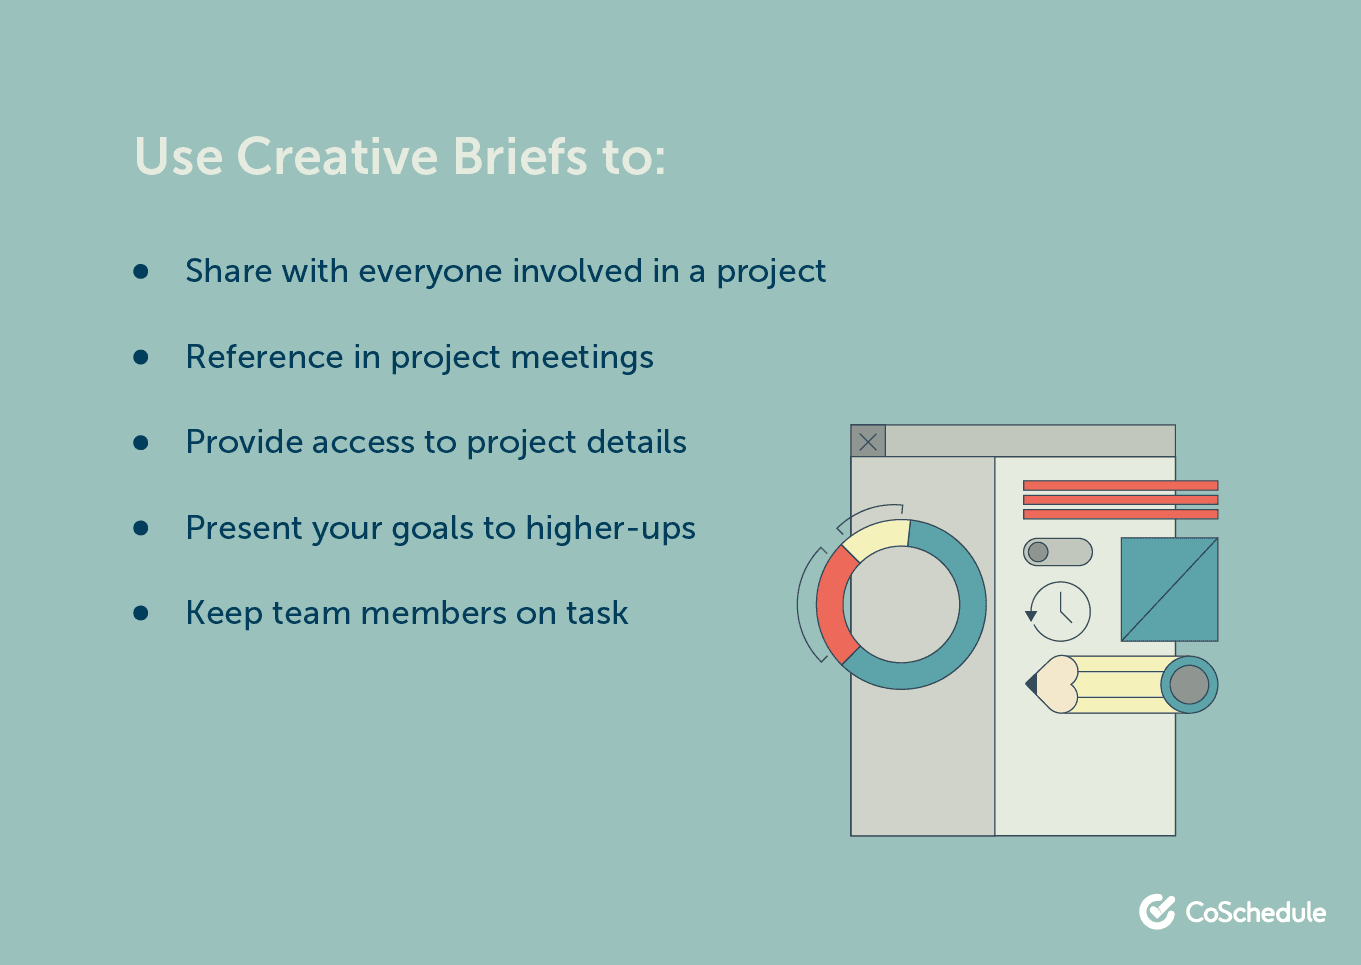 List of outcomes of using a creative brief